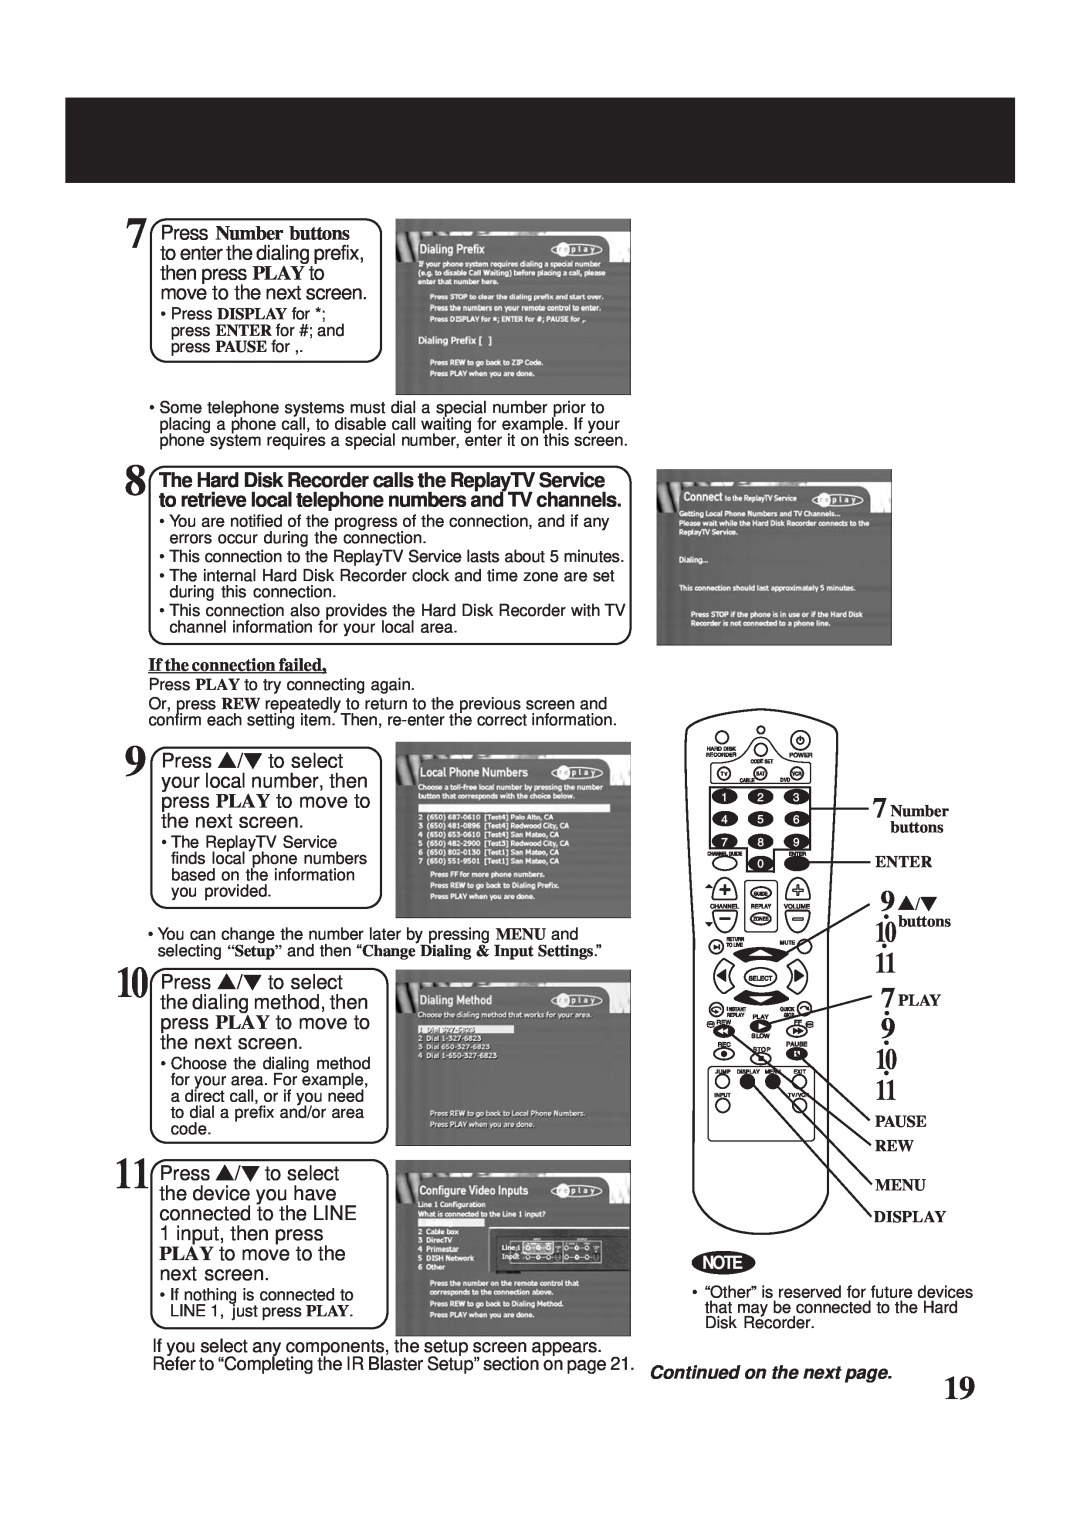 Panasonic PV-HS2000 operating instructions If the connection failed, If you select any components, the setup screen appears 